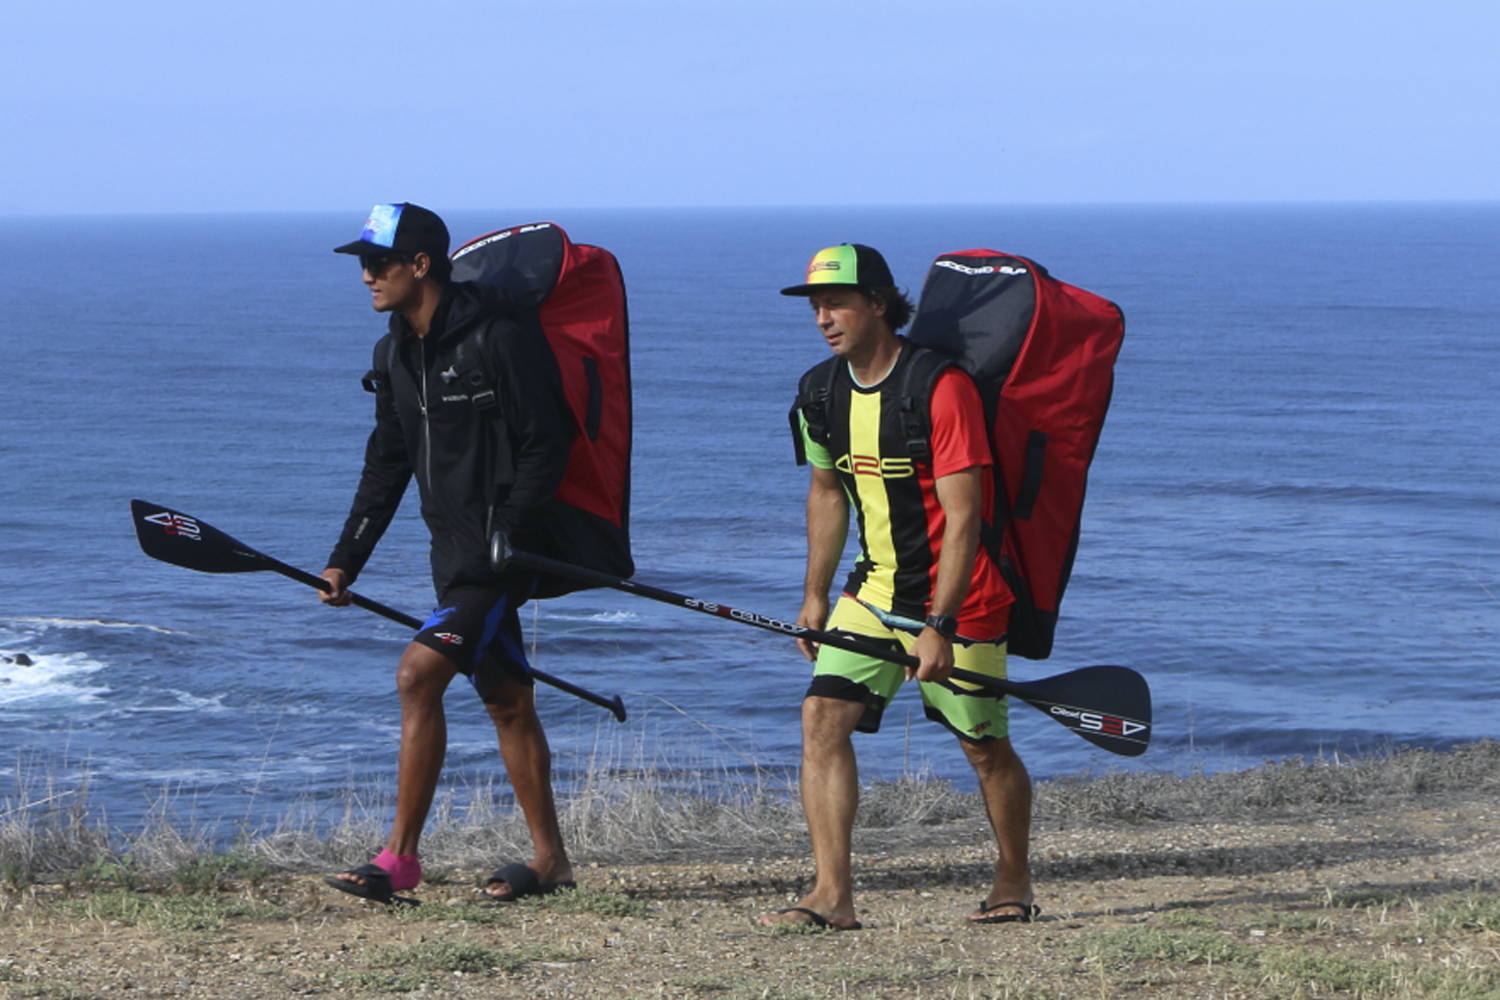 425pro paddles: Two men carrying the paddles on the sea coast